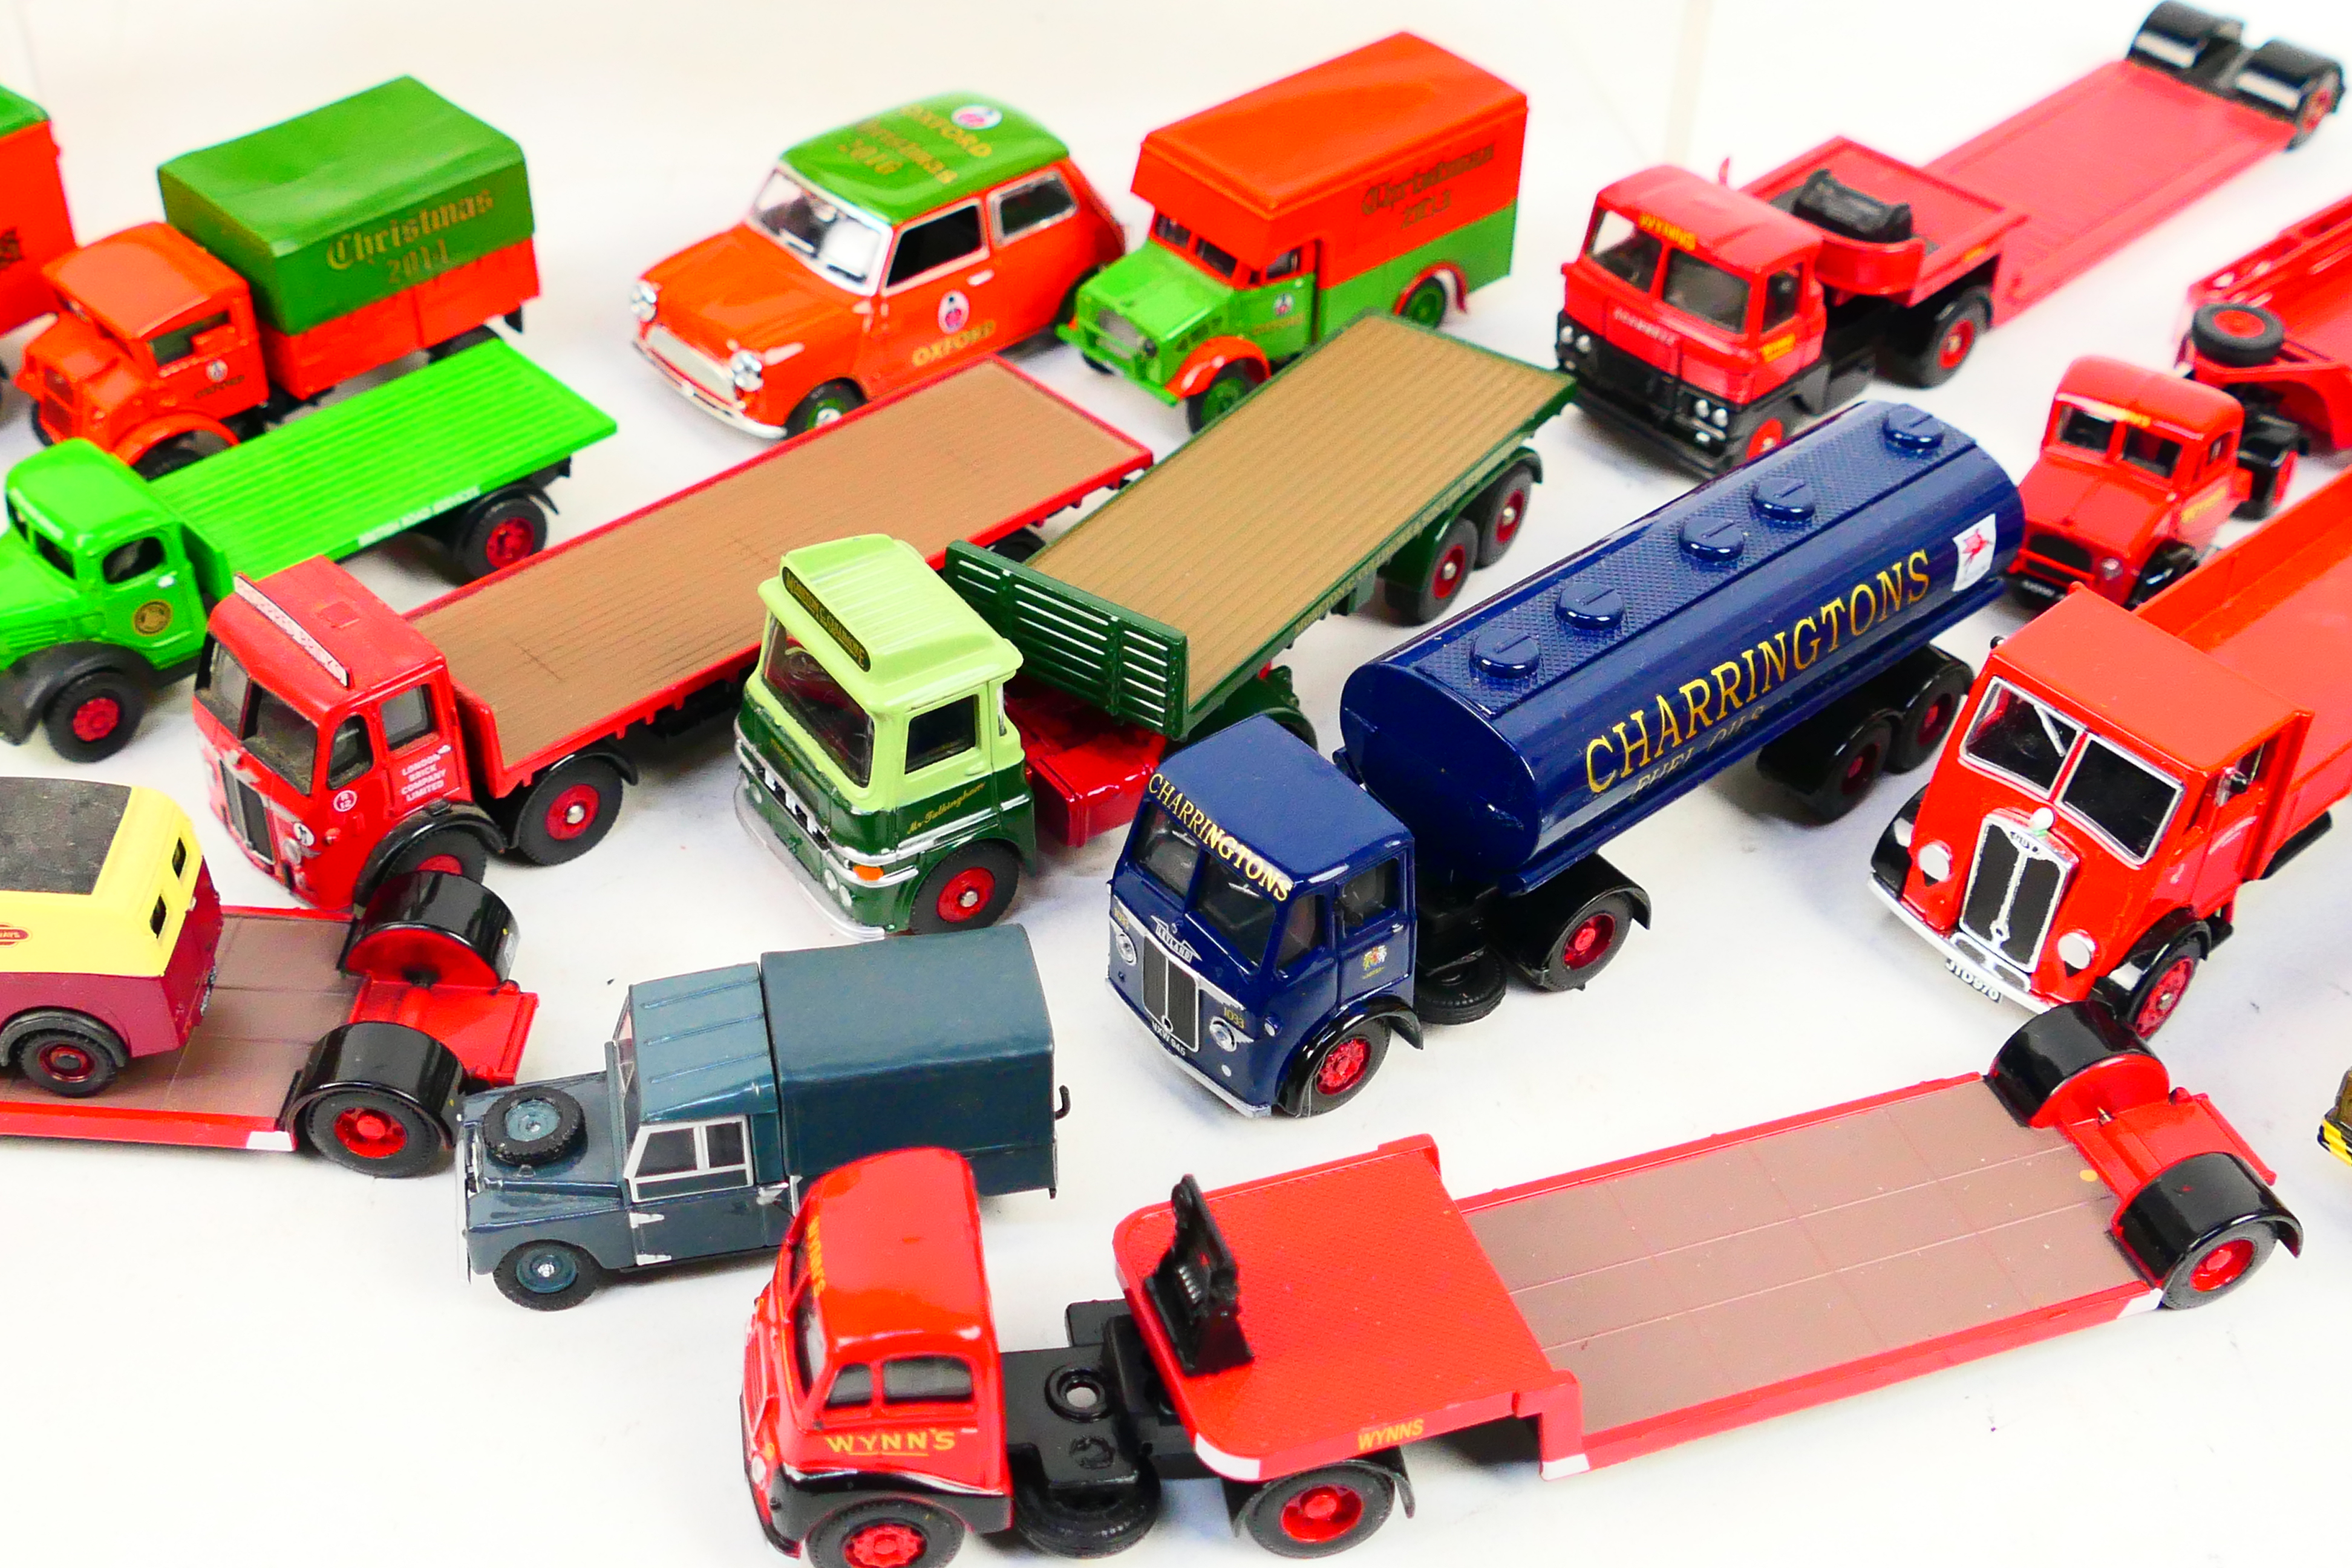 Oxford Diecast - Classix - Corgi - Lledo - Approximately 30 diecast model vehicles in various - Image 6 of 7